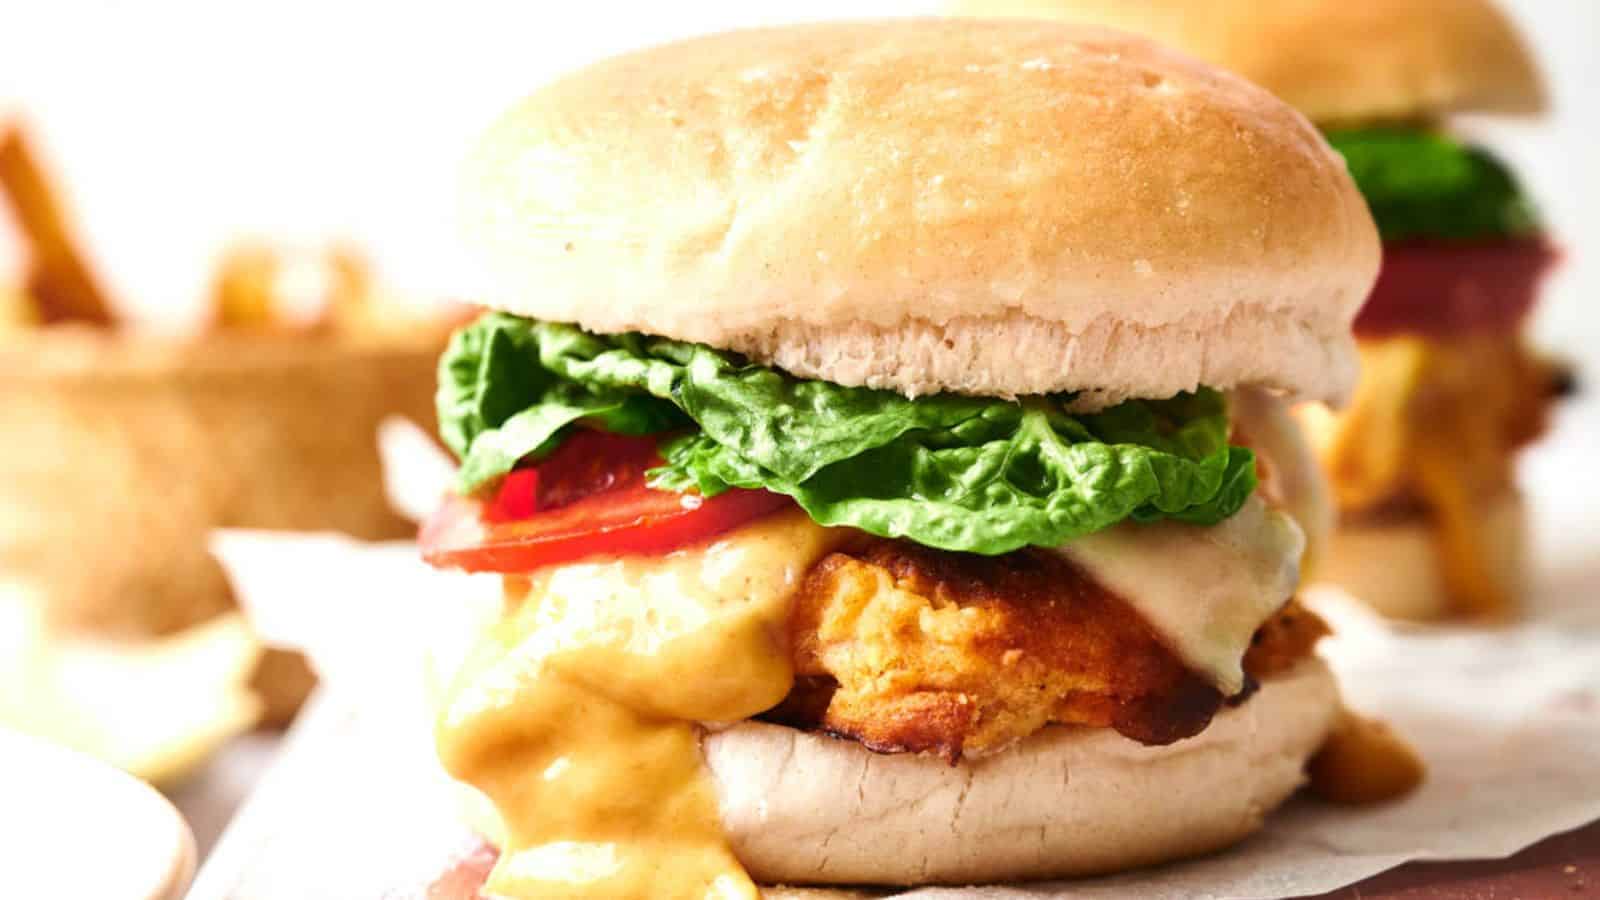 <p>For fast-food enthusiasts, our Homemade KFC Zinger Burger lets you recreate that crispy, spicy kick at home. It's a crowd-pleaser that's sure to satisfy those fried chicken cravings.<br><strong>Get the Recipe: </strong><a href="https://www.pocketfriendlyrecipes.com/kfc-zinger-burger-recipe/?utm_source=msn&utm_medium=page&utm_campaign=msn">Homemade KFC Zinger Burger</a></p>